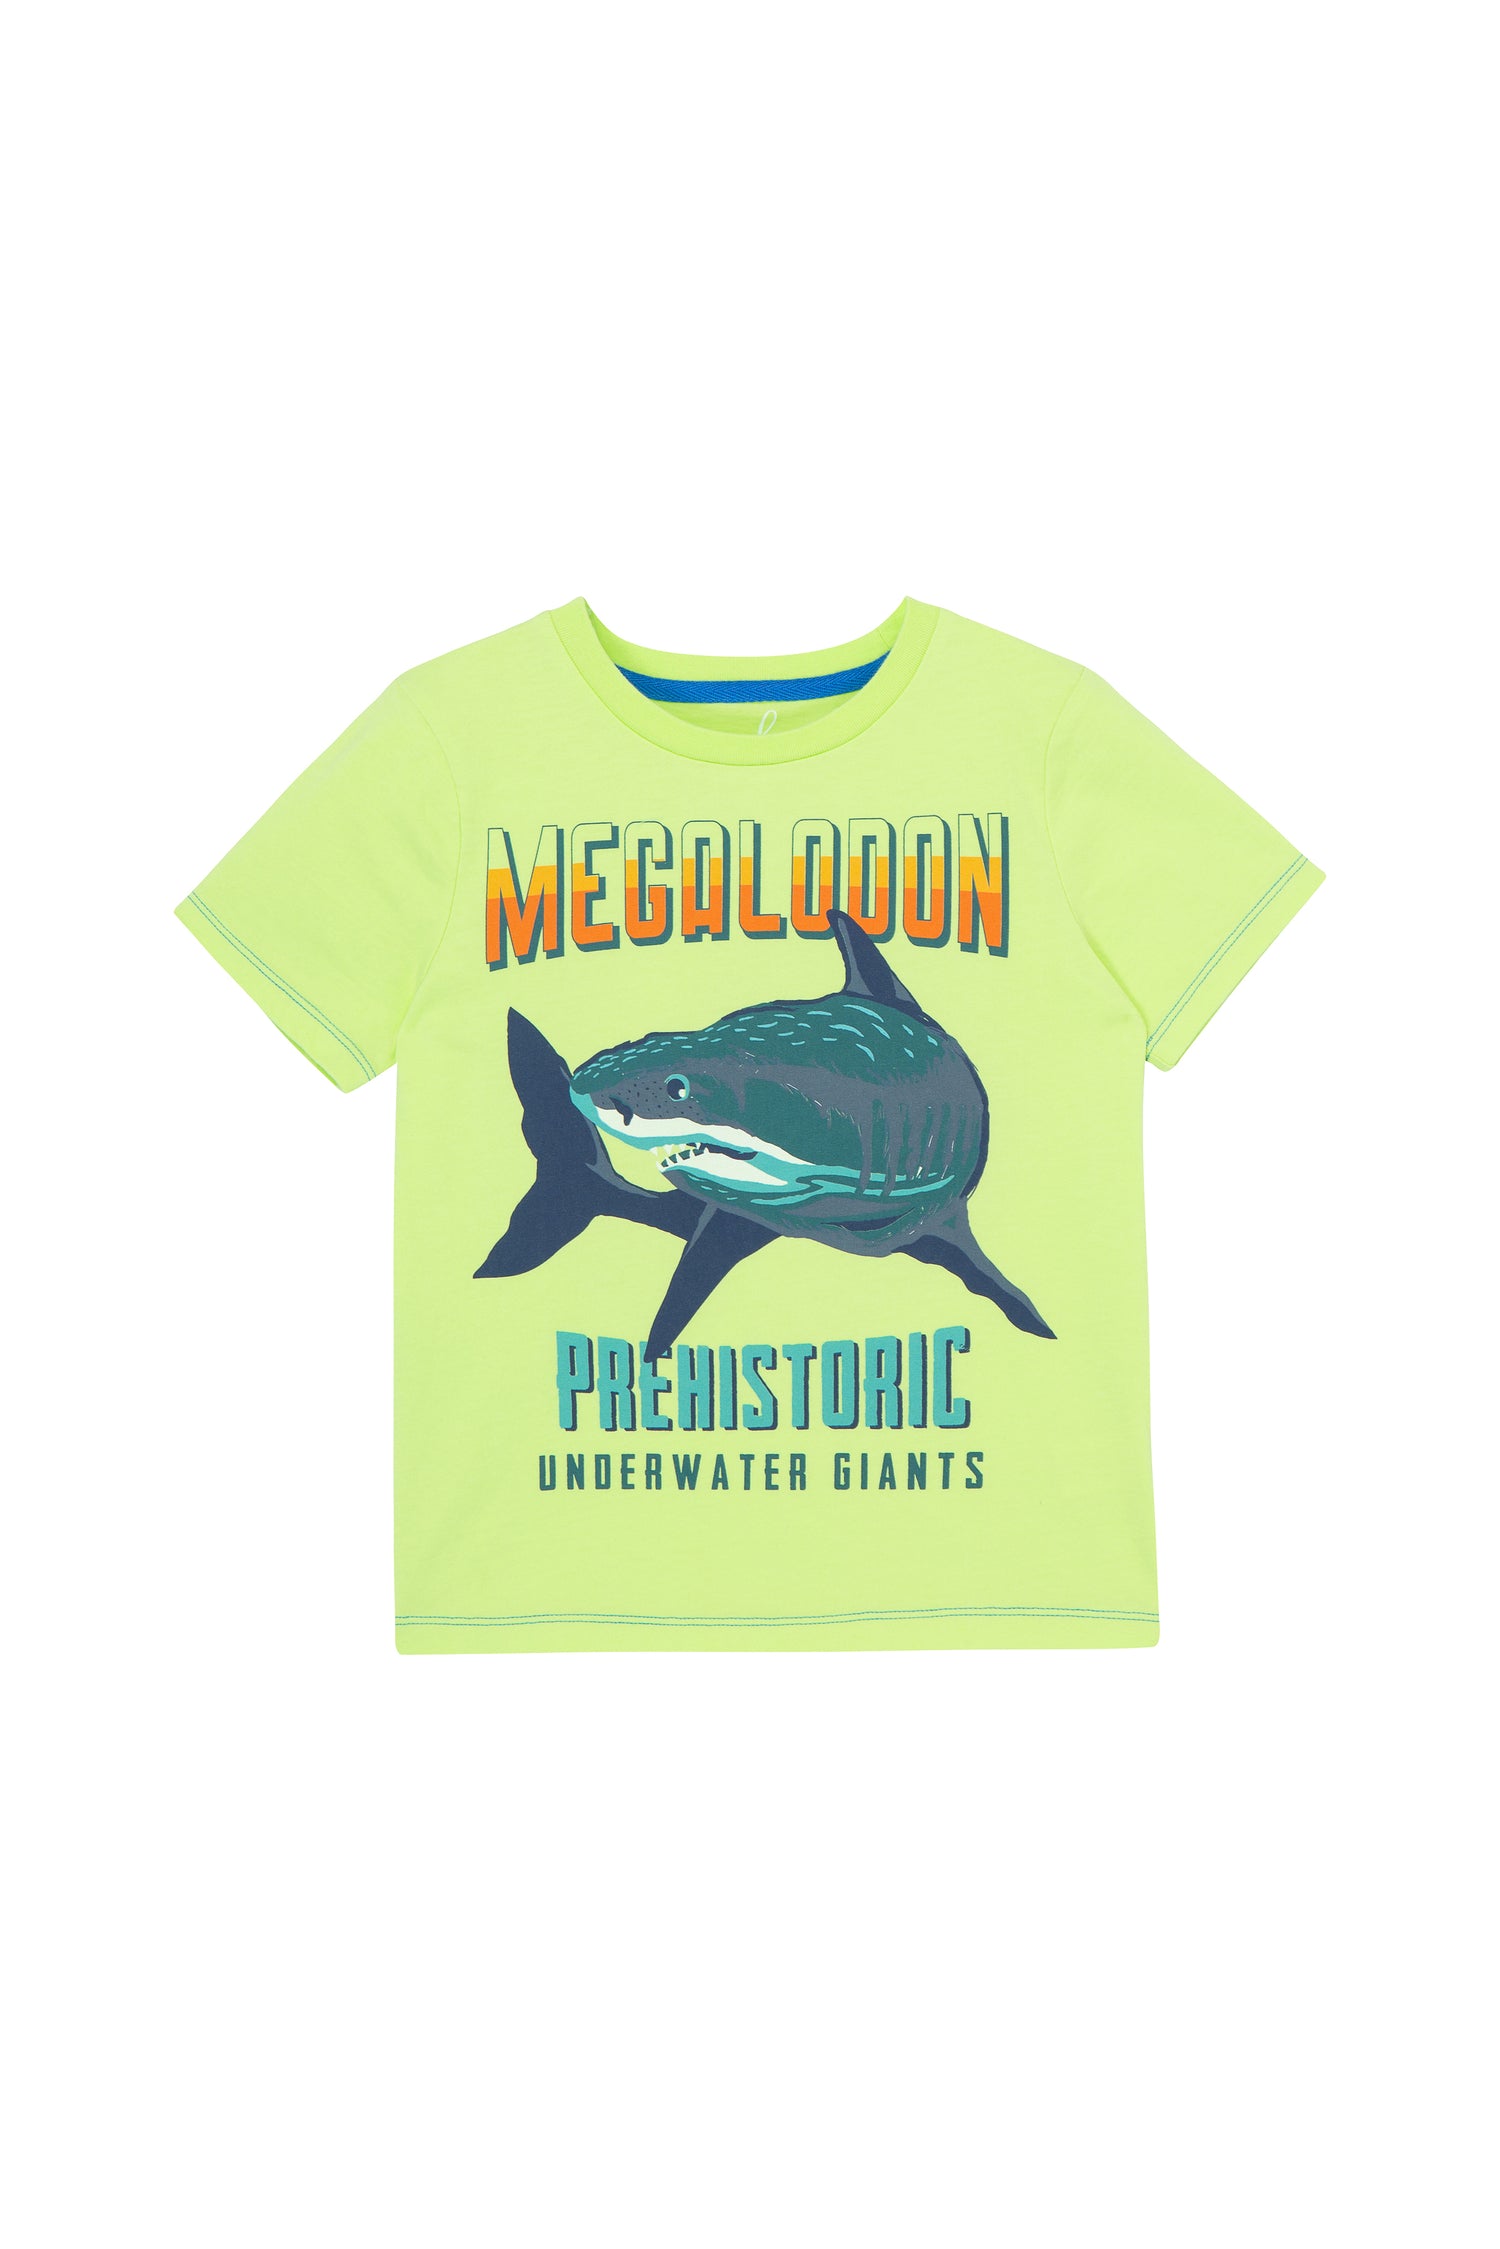 GREEN T-SHIRT WITH SHARK GRAPHIC AND "MEGALODON PREHISTORIC UNDERWATER GIANTS"